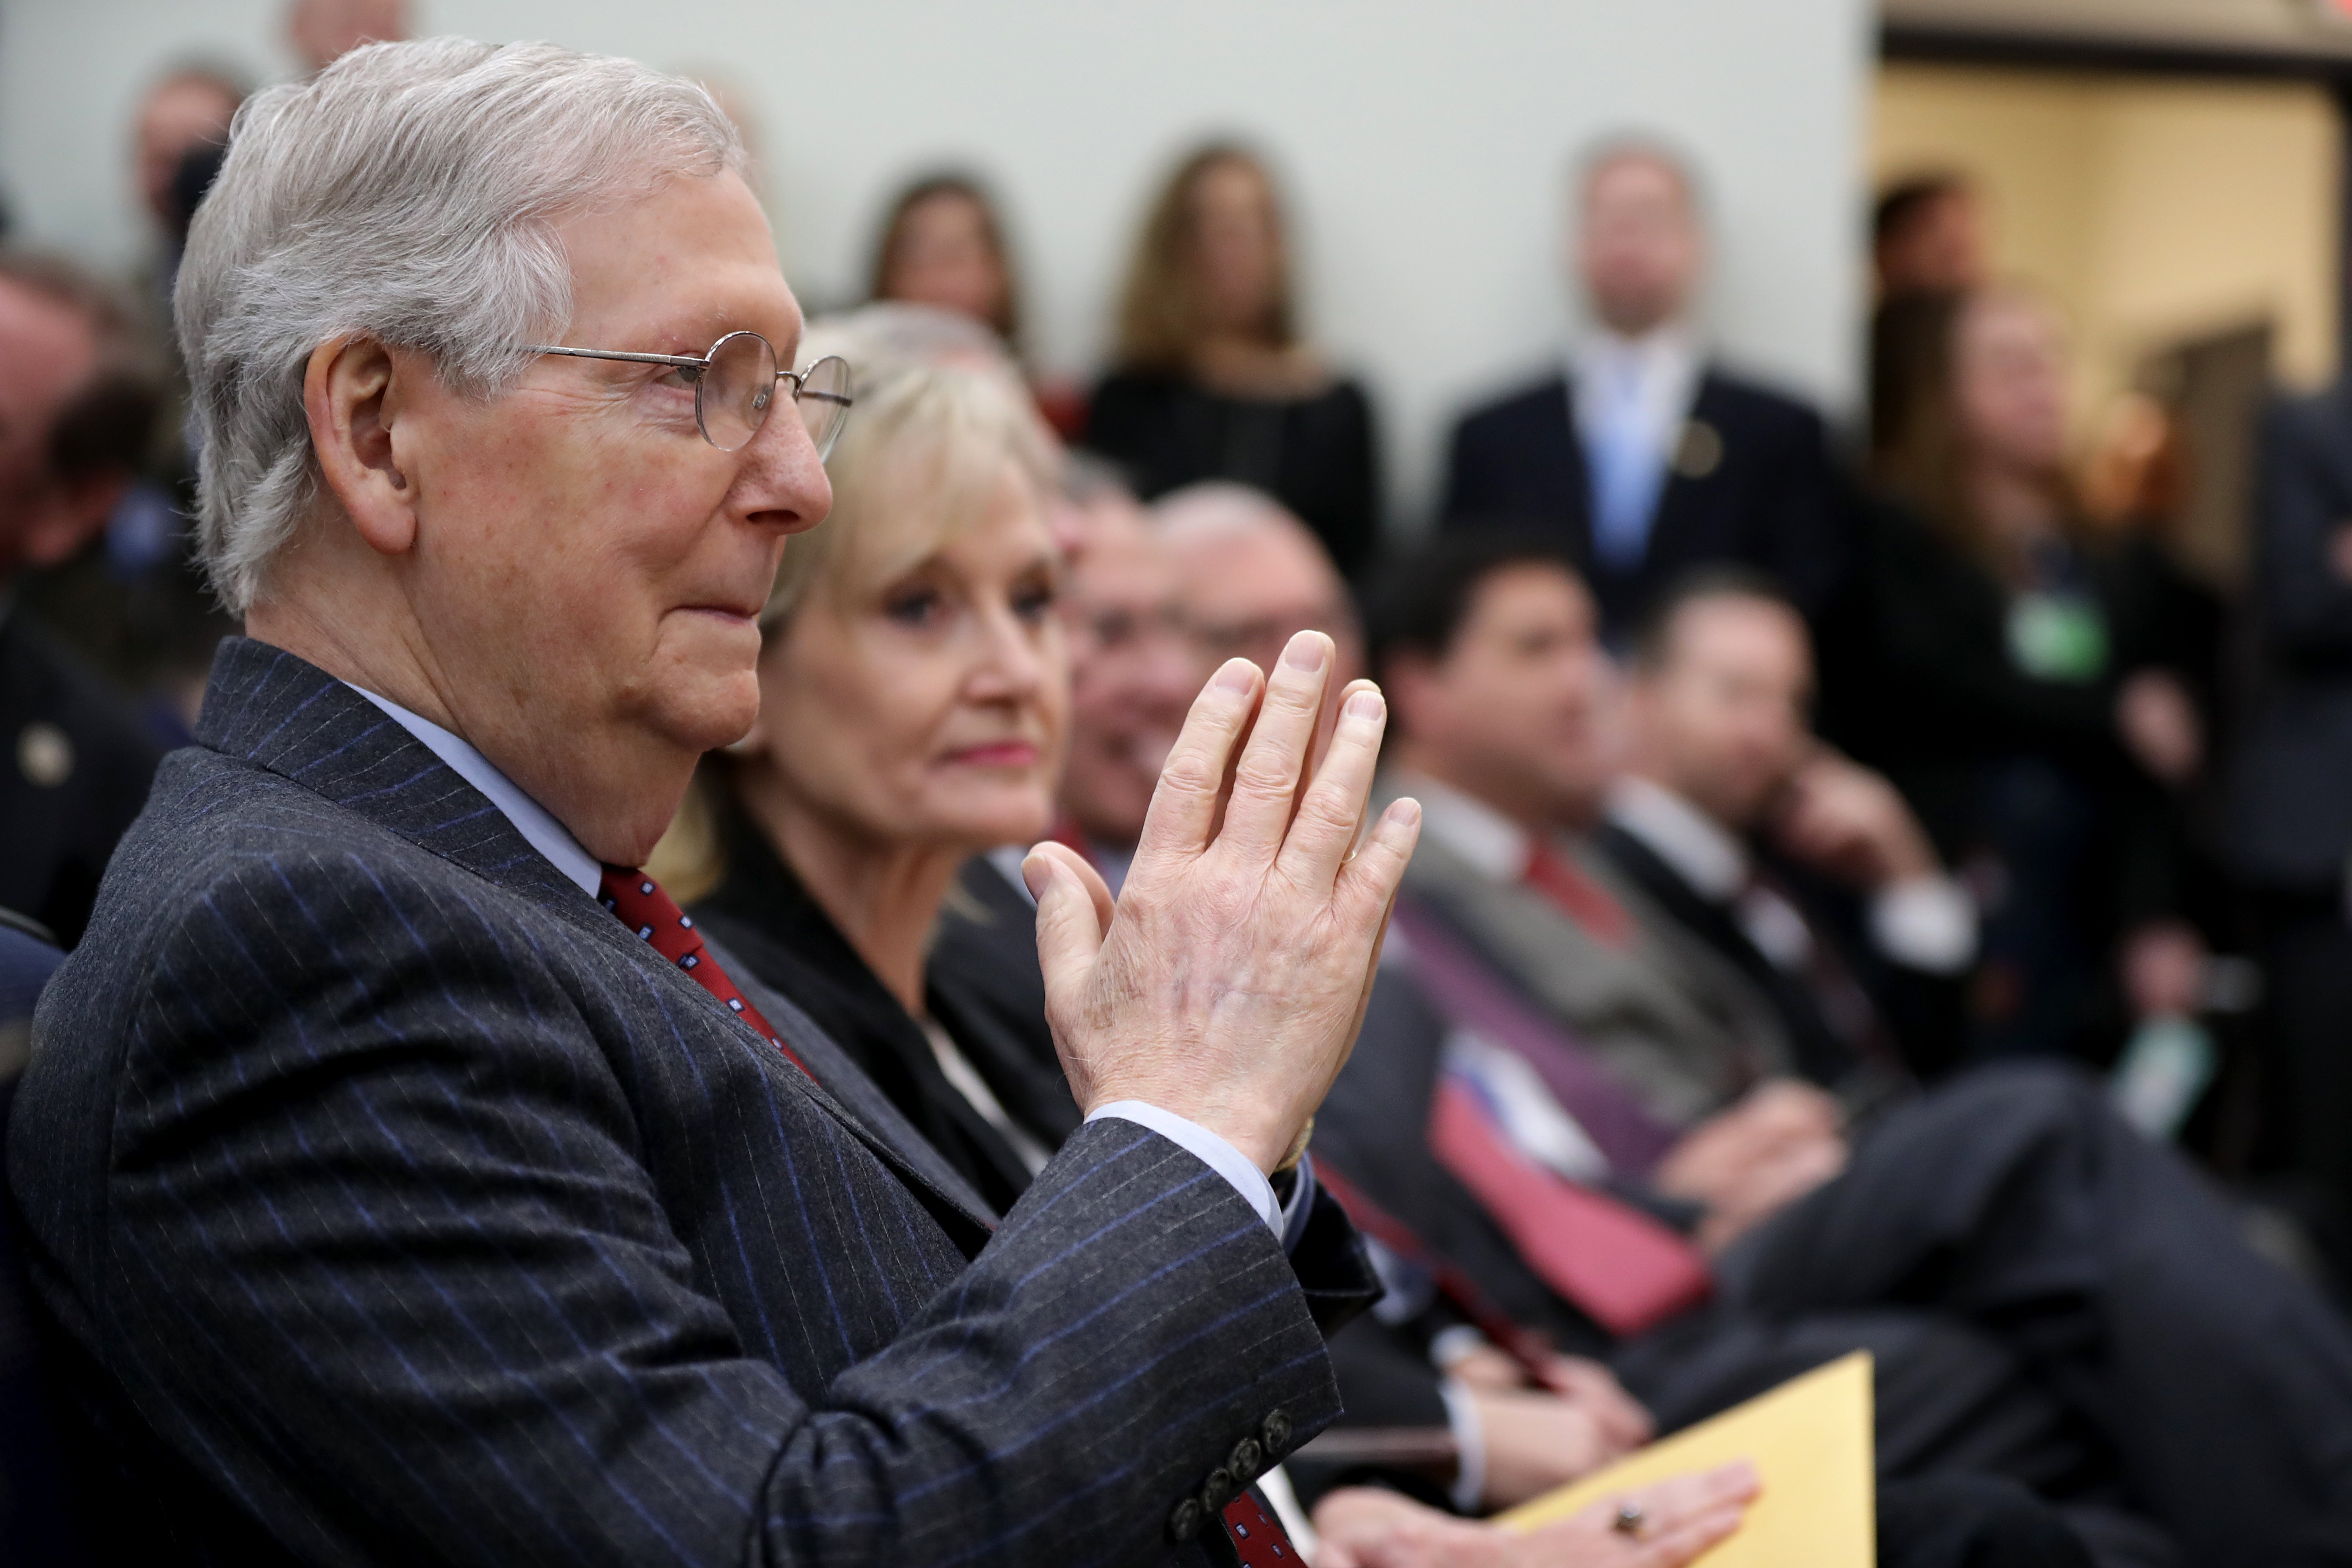 Senate Majority Leader Mitch McConnell (L) joins fellow senators while listening to U.S. President Donald Trump during the signing ceremony for the Agriculture Improvement Act in the South Court Auditorium of the Eisenhower Executive Office Building December 20, 2018 in Washington, DC. (Photo by Chip Somodevilla/Getty Images)